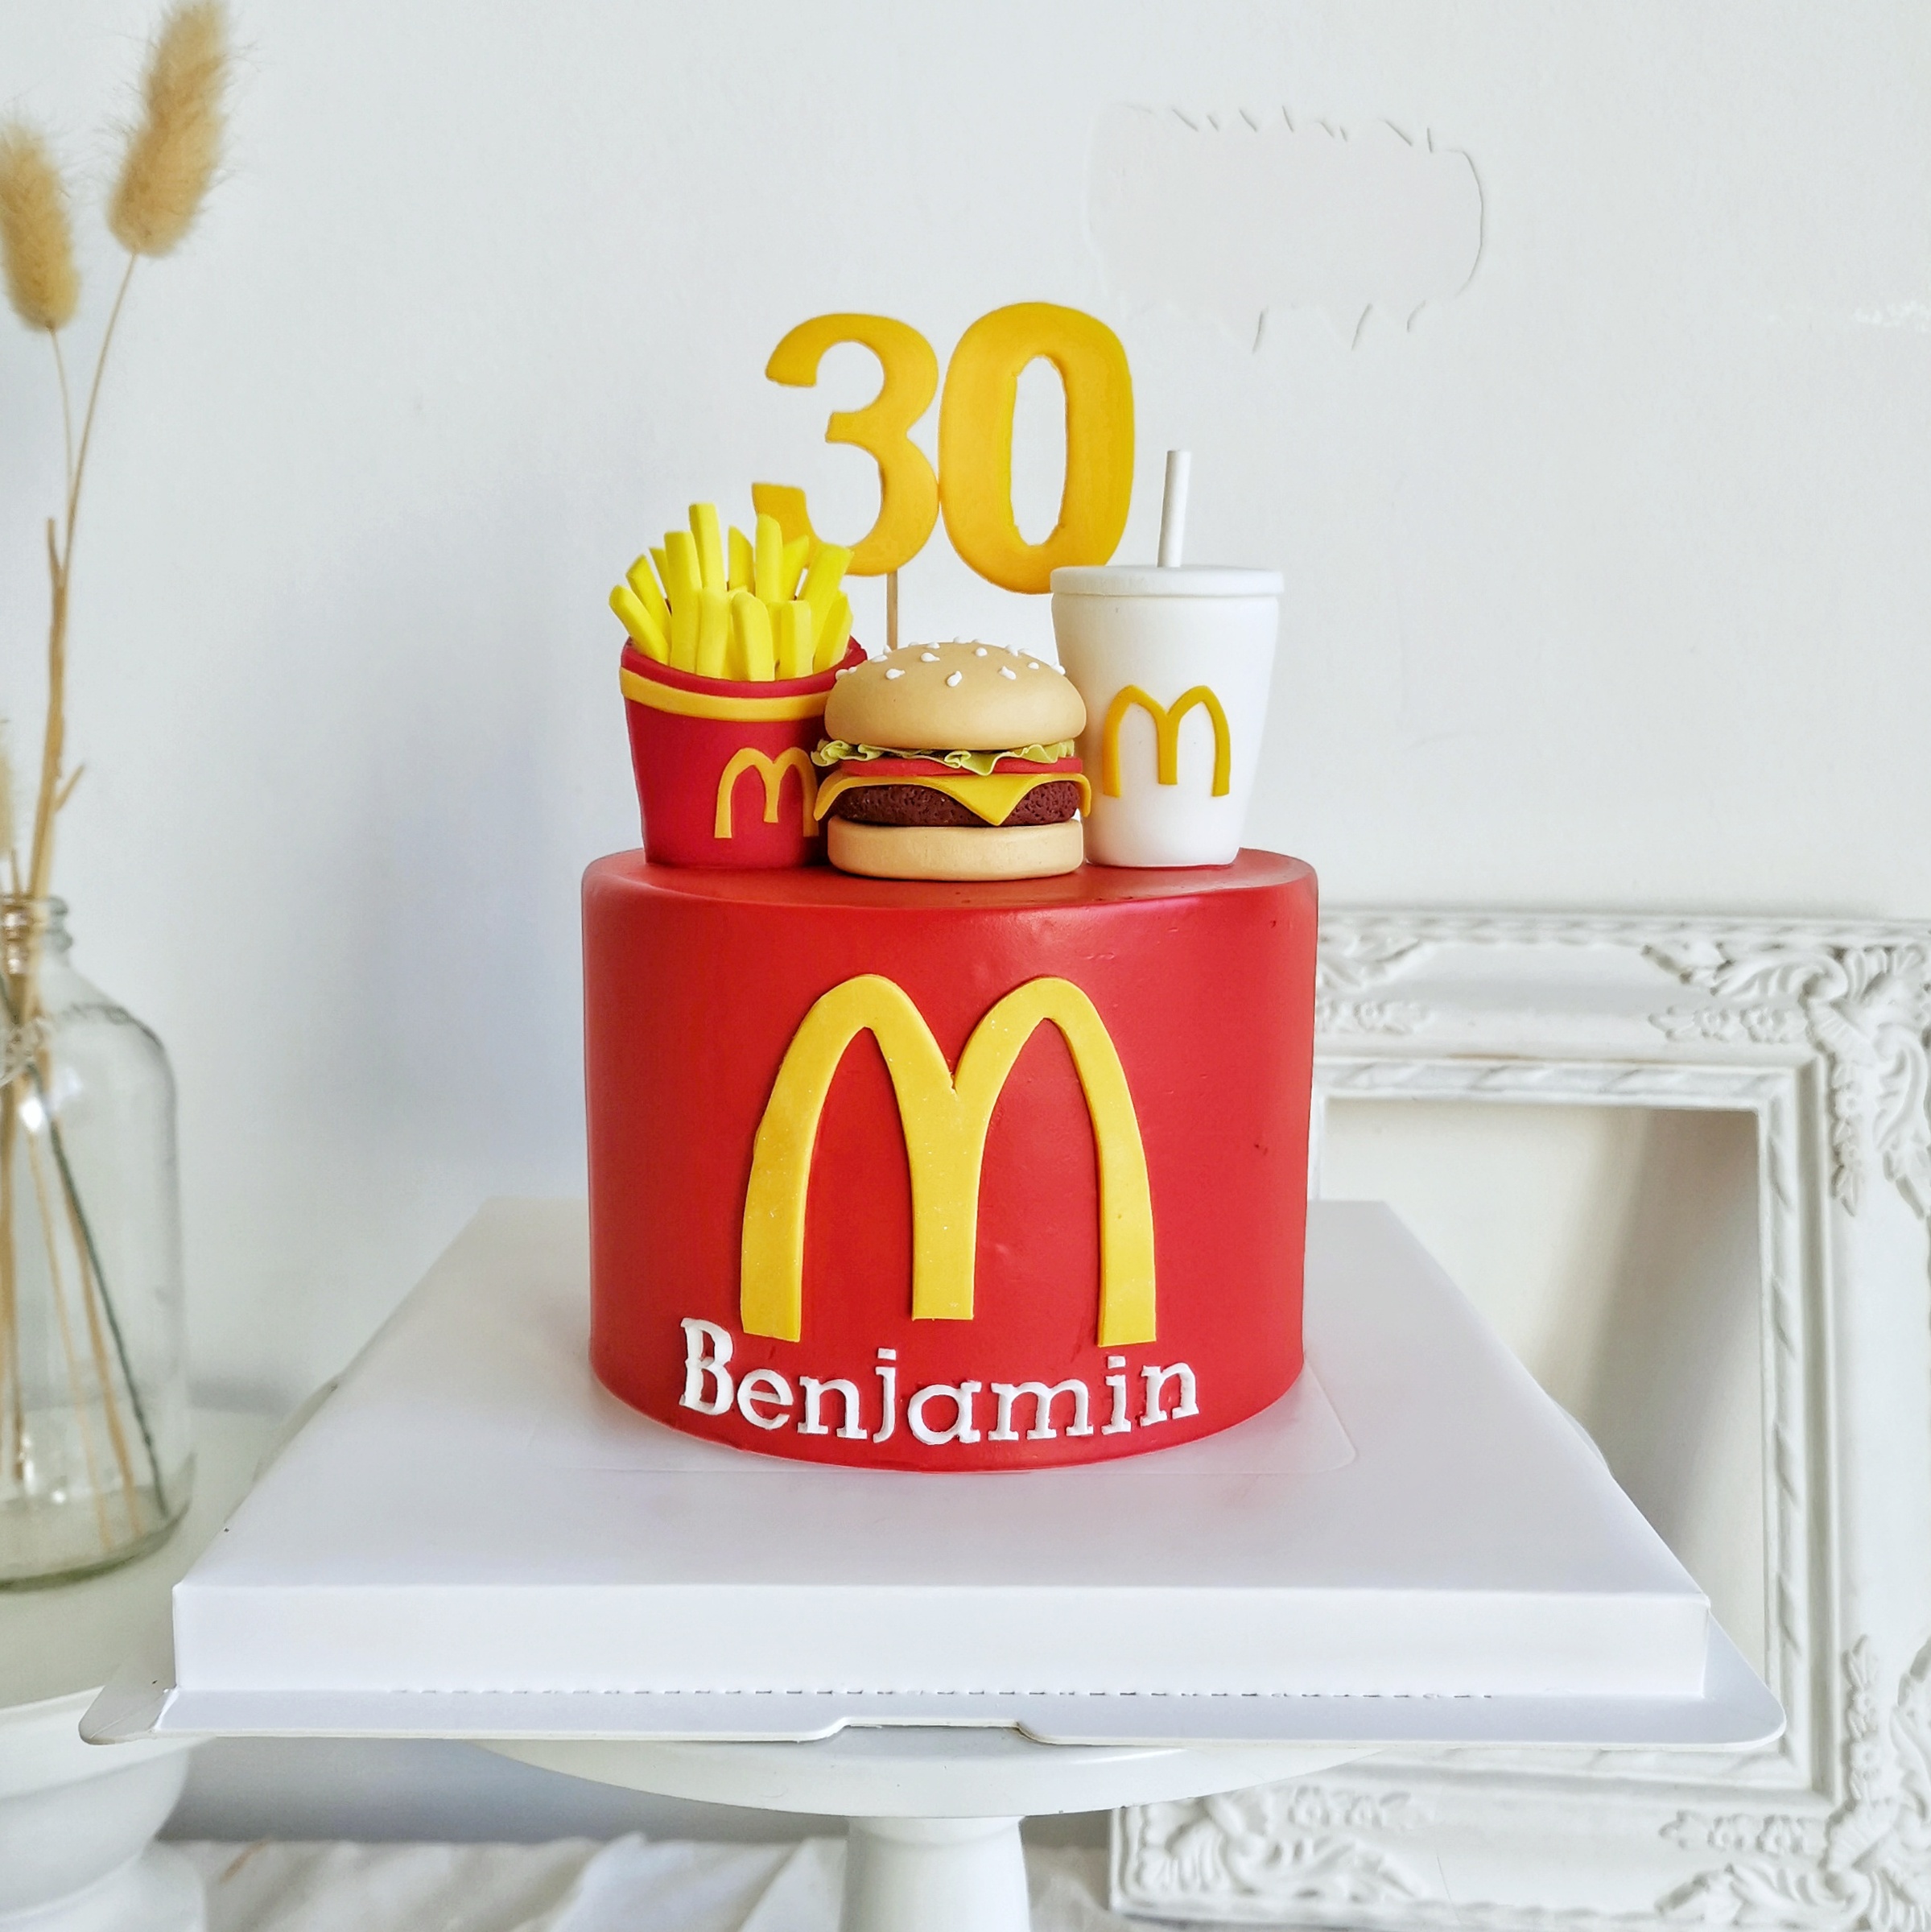 Inspiration: Food and Drink themed cakes - Quality Cake Company